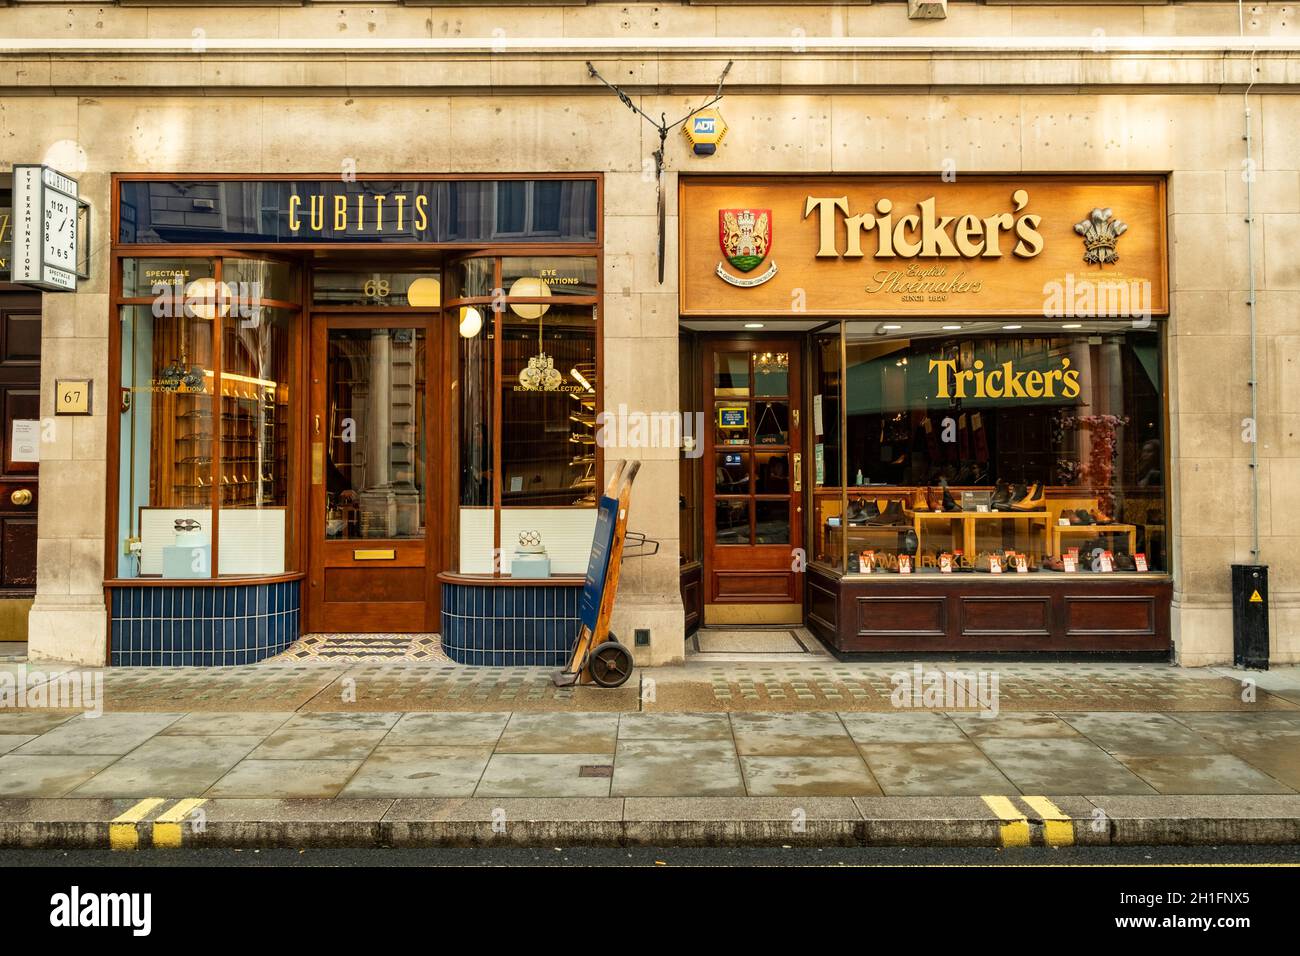 London- Trickers and Cubitts shops on Jermyn Street in St James. A shopping street famous for its upmarket luxury brands Stock Photo